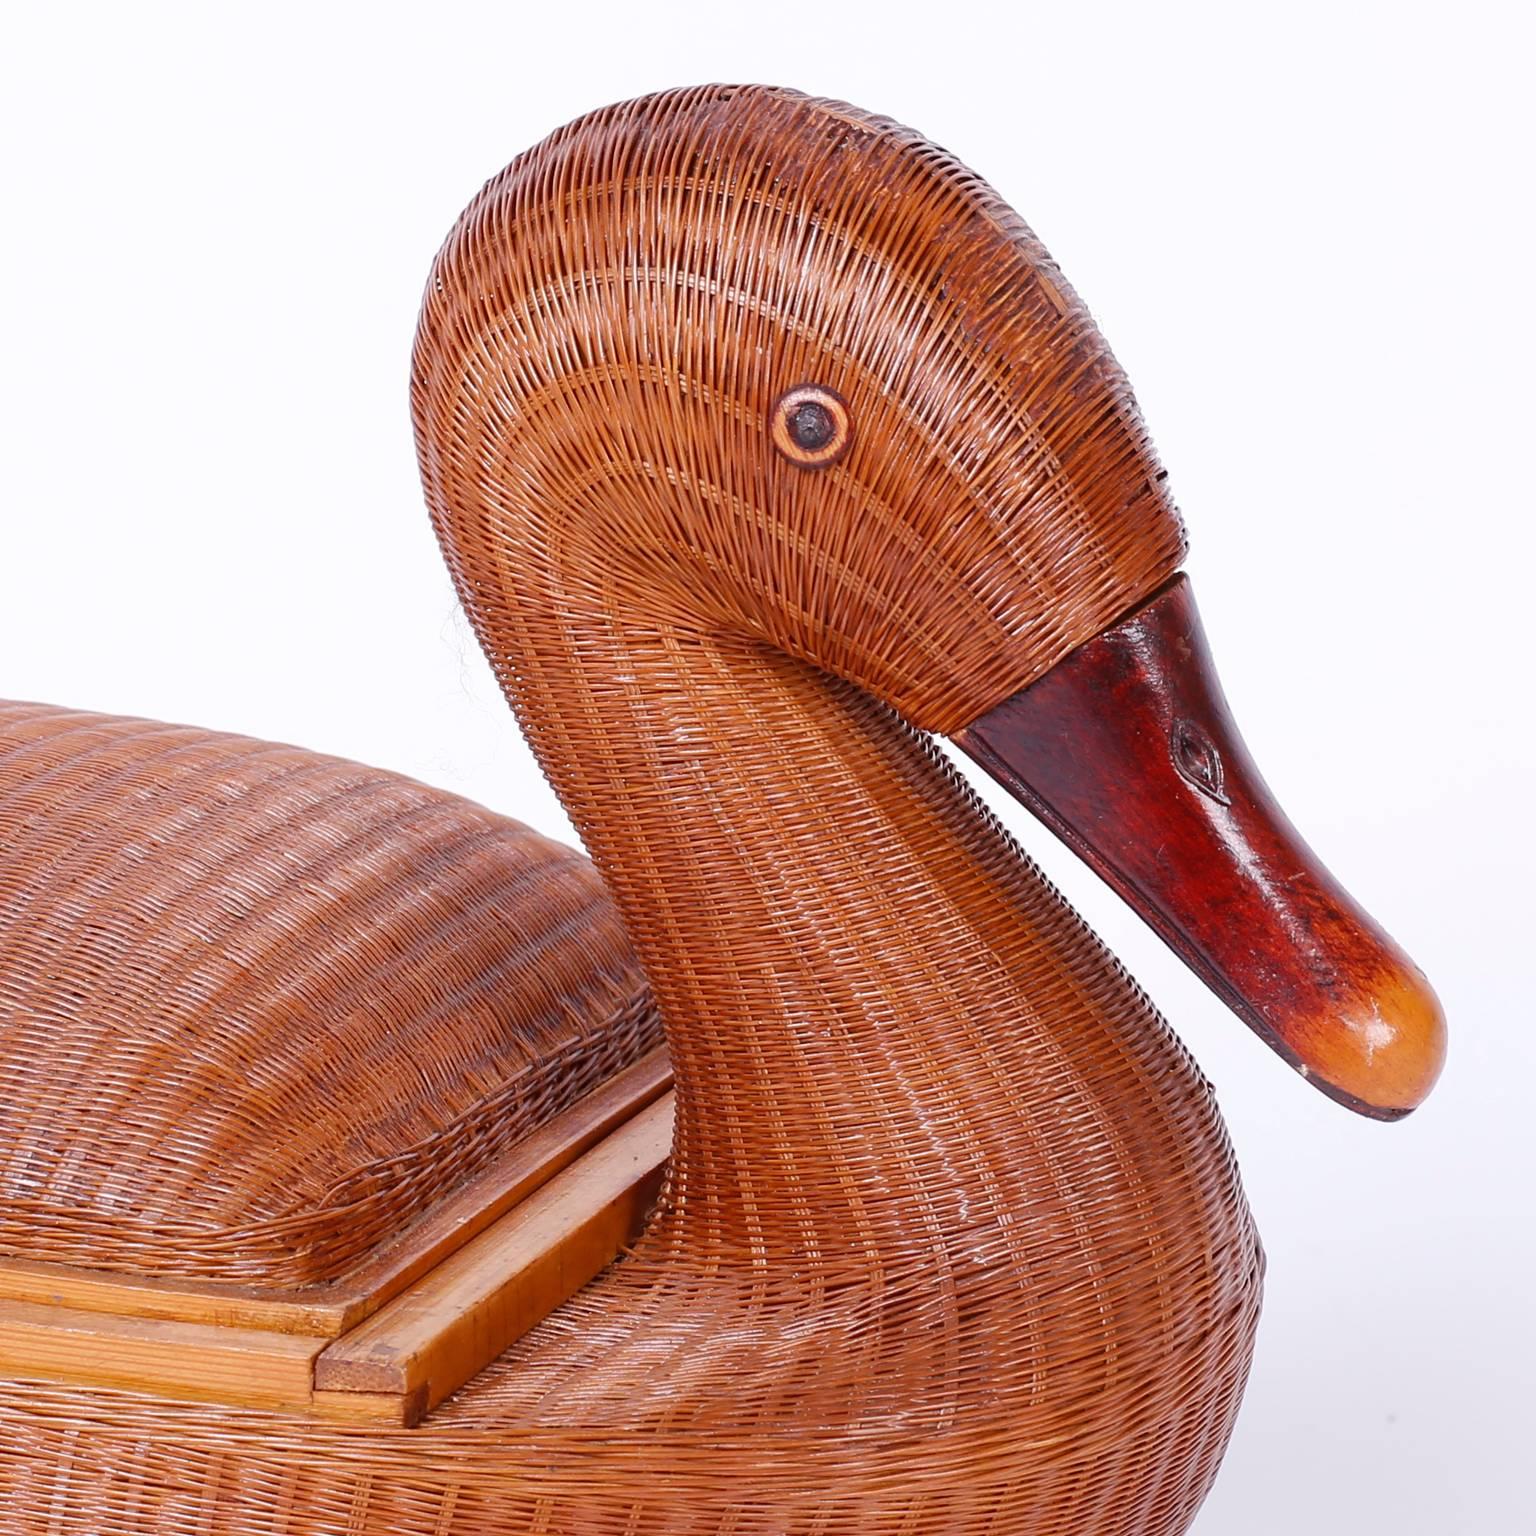 Wicker duck box from the Shanghai collection with its notorious intricate wicker structure, removable lid, carved beak, and bamboo trim.